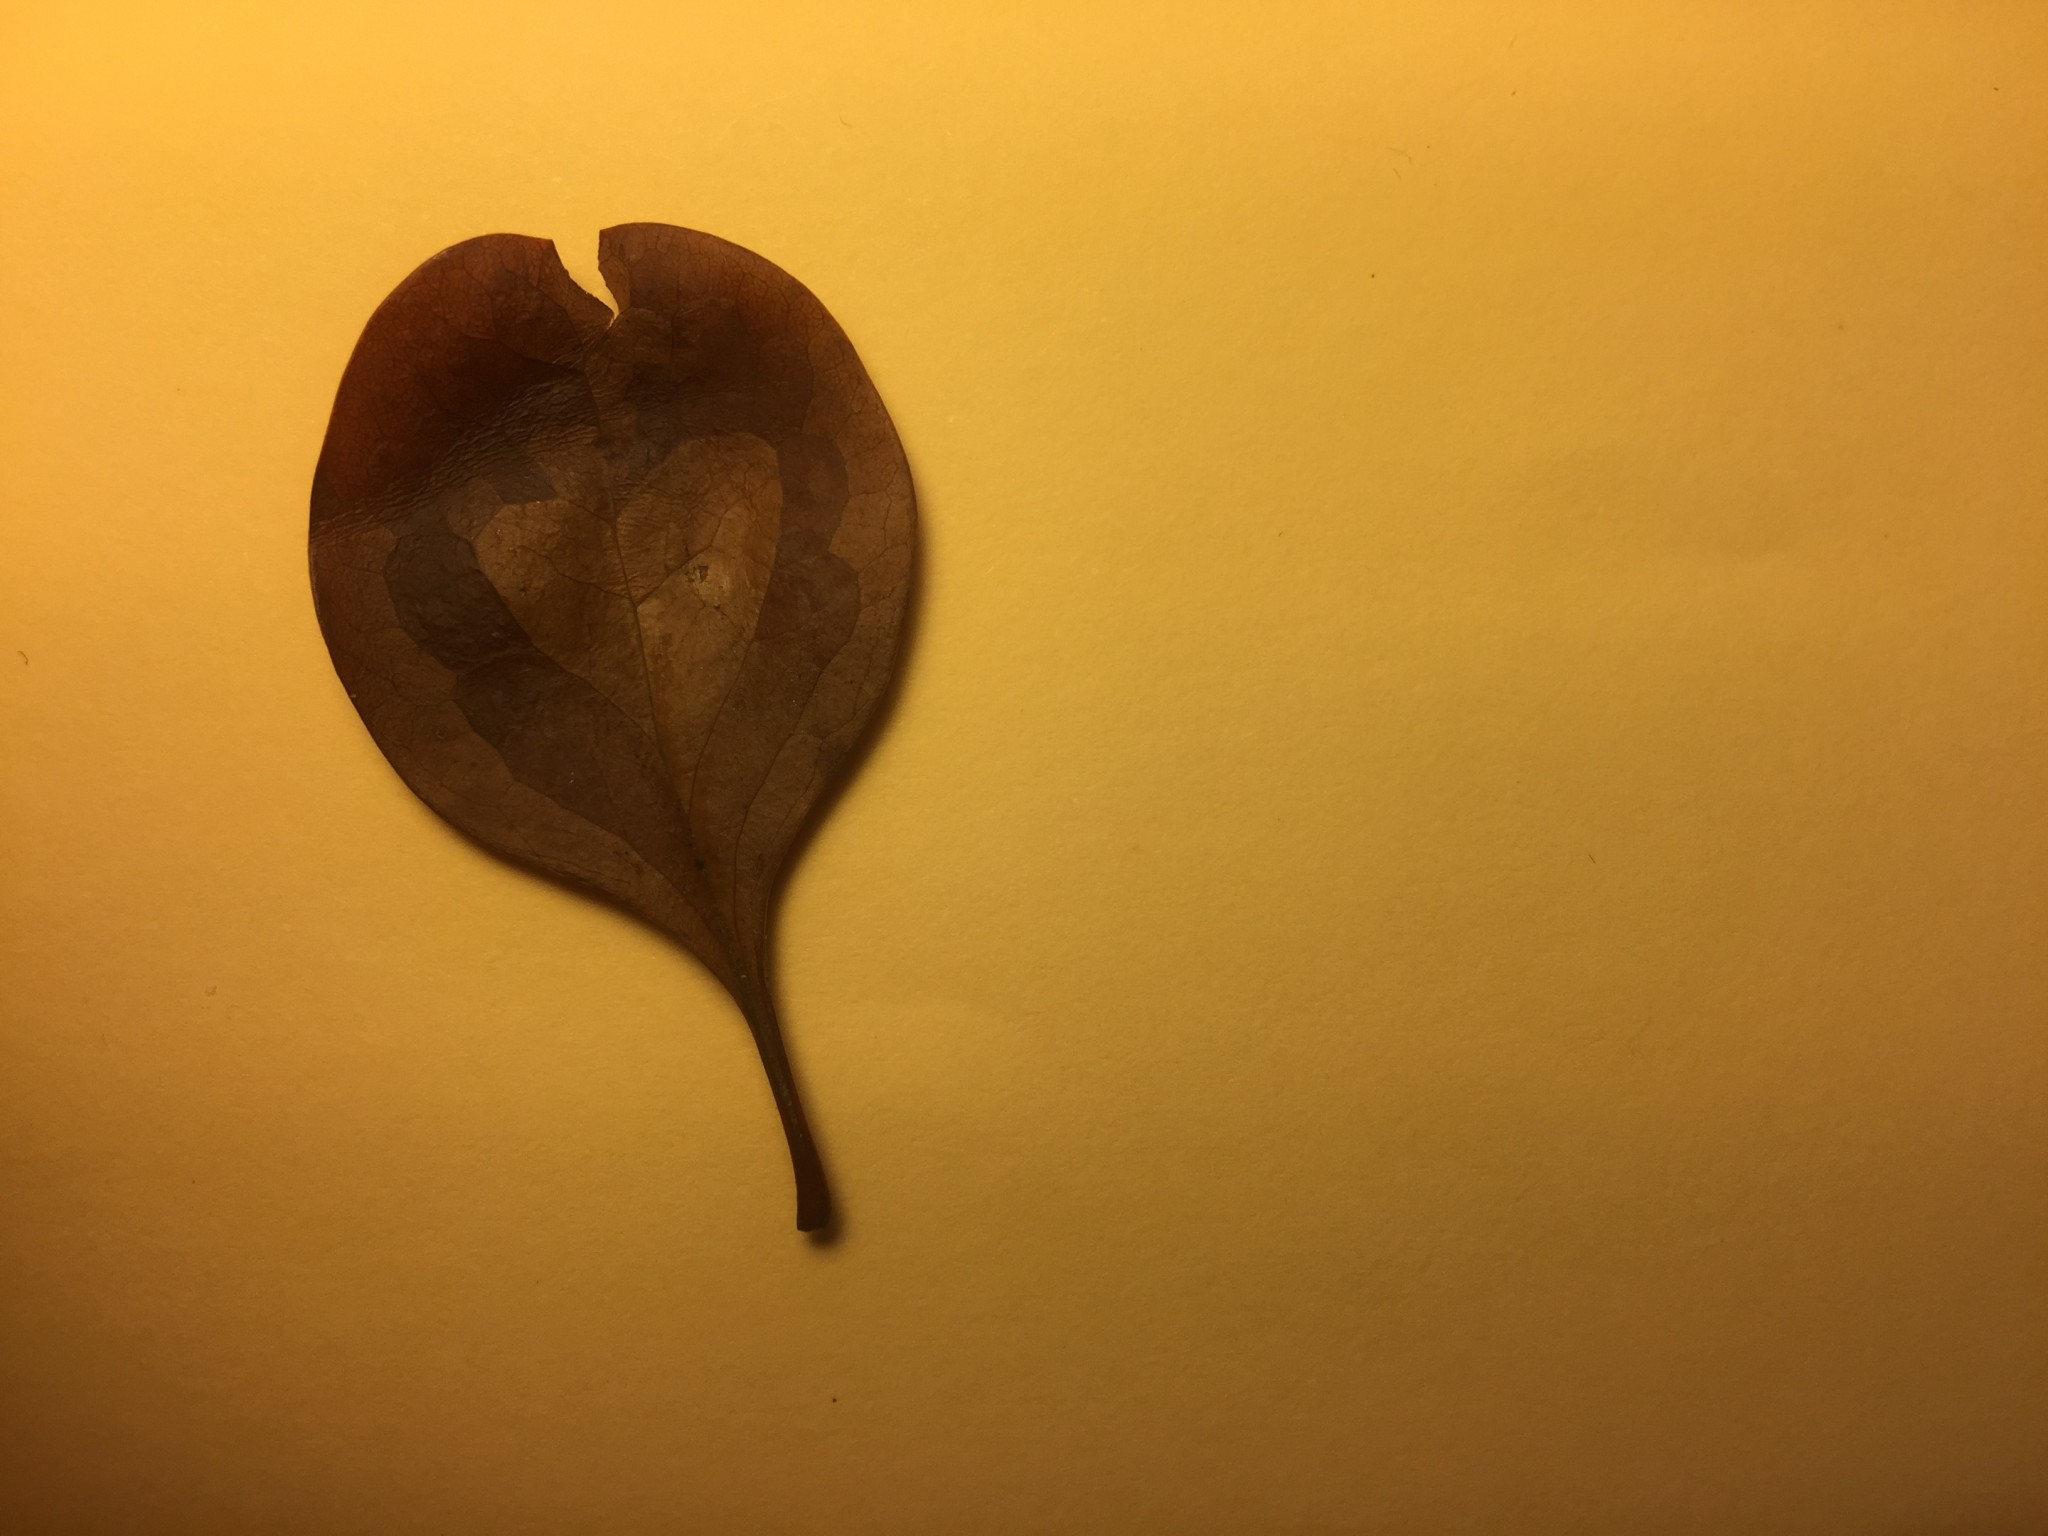 Boy Three gave me a leaf with a heart on it. It's beautiful, but you'll have to take my word for it as I've failed to take a good photo of it. 